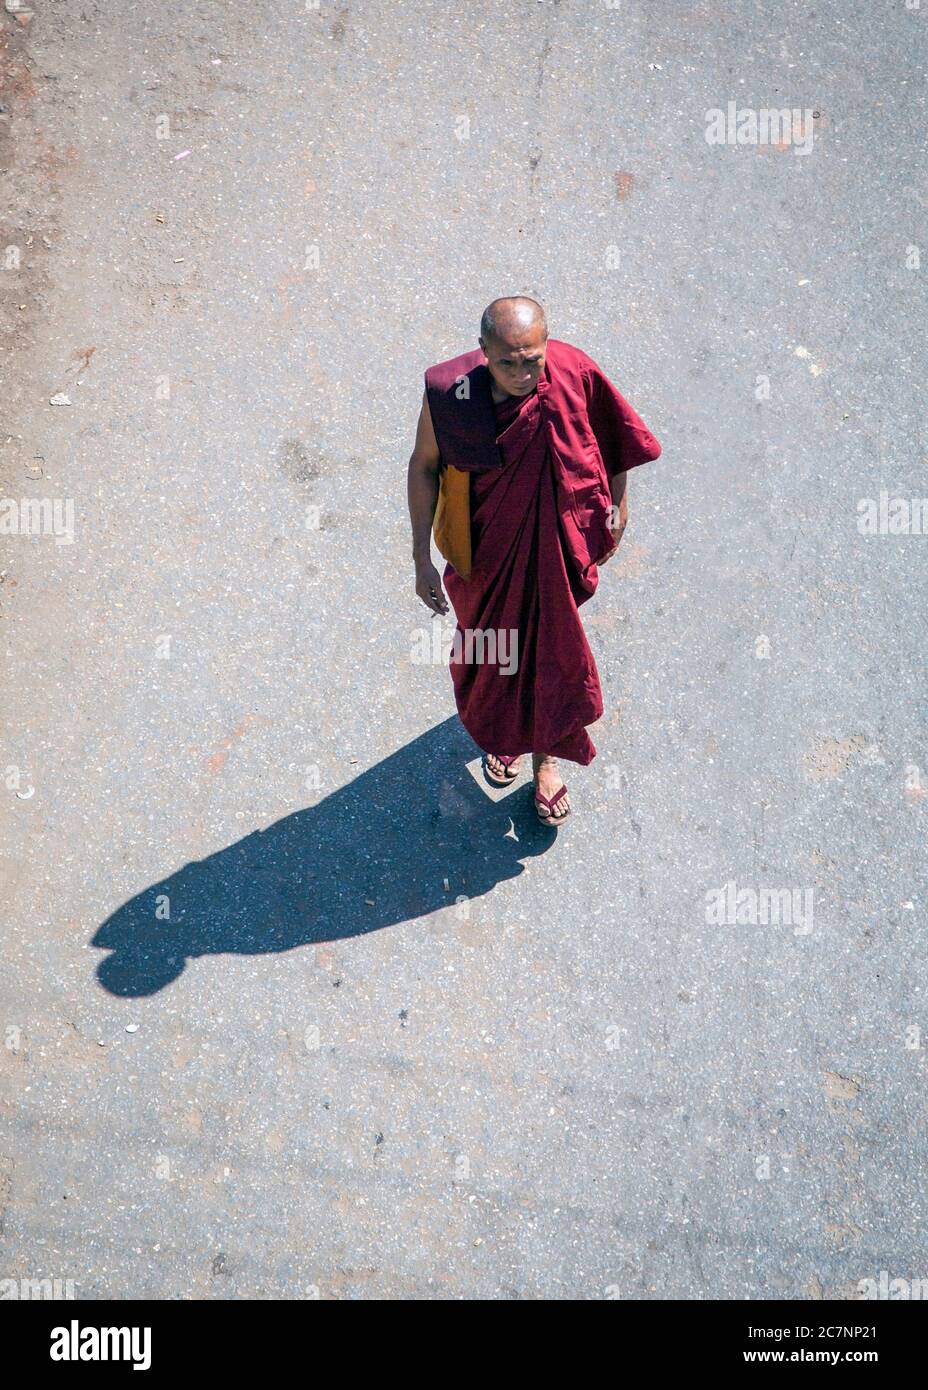 An overhead view of a Buddhist monk walking on a road in Mandalay, Myanmar Stock Photo